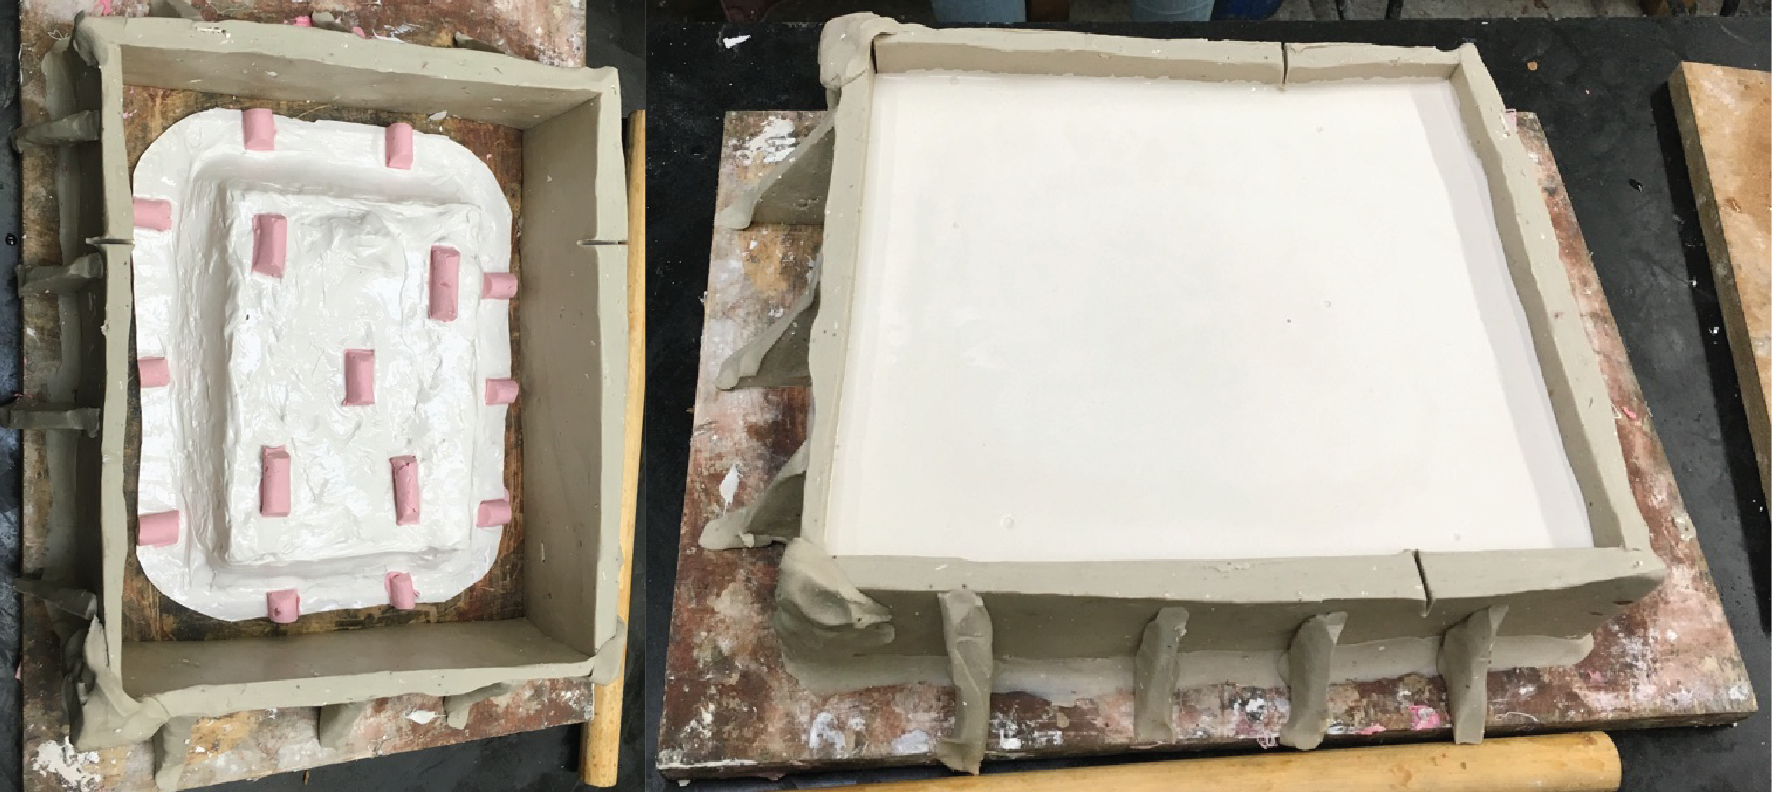 plaster support around the mold